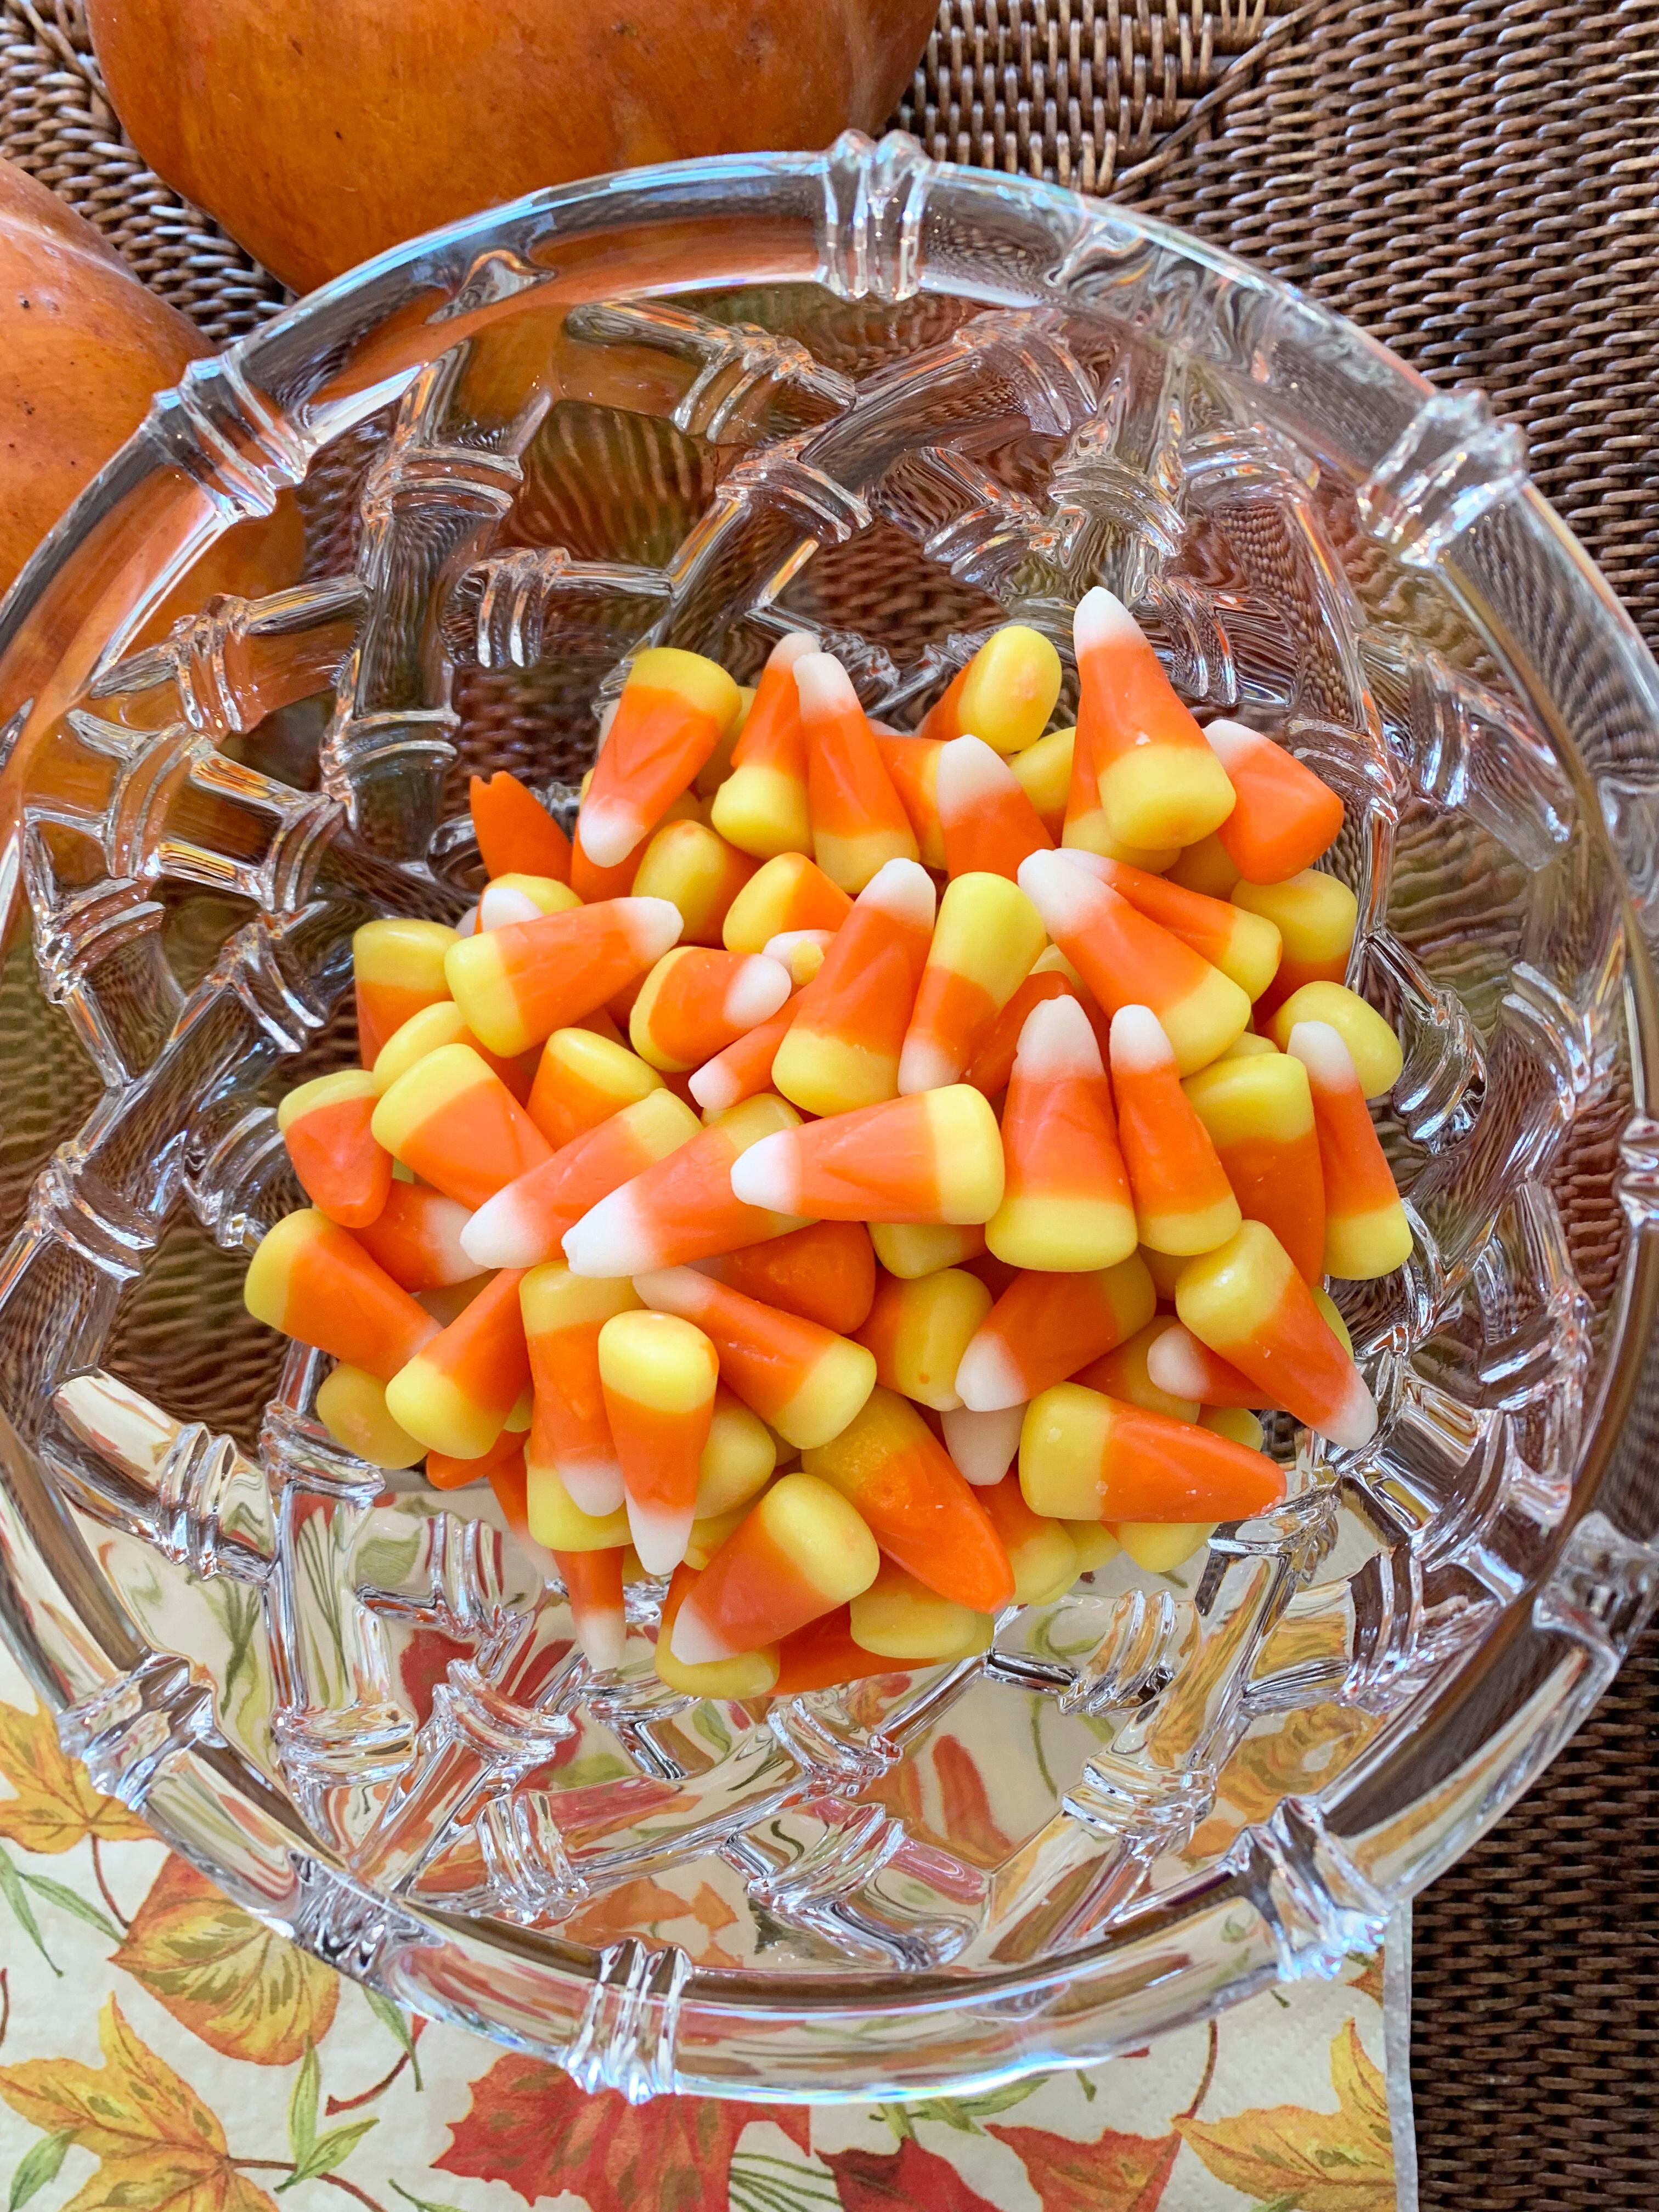 Could it be a sign? Astro fans believe 'candy corn' uniforms will